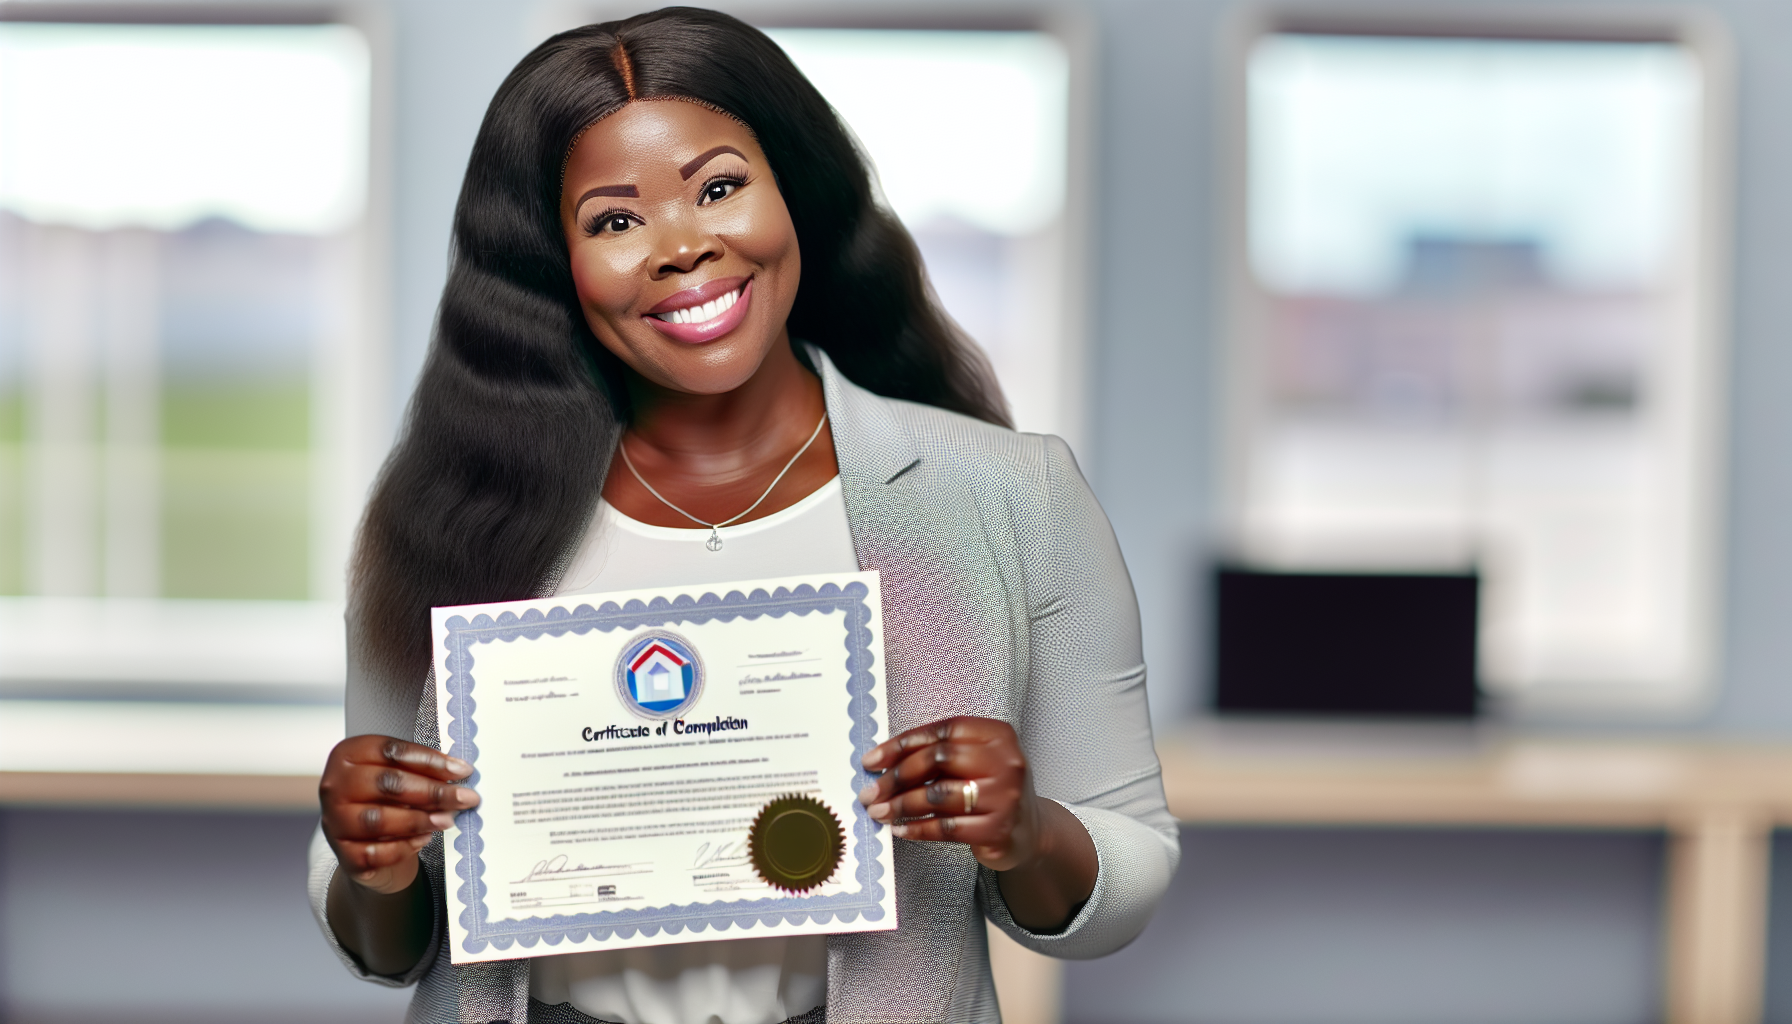 Photo of a person holding a certificate of completion for a homebuyer education course